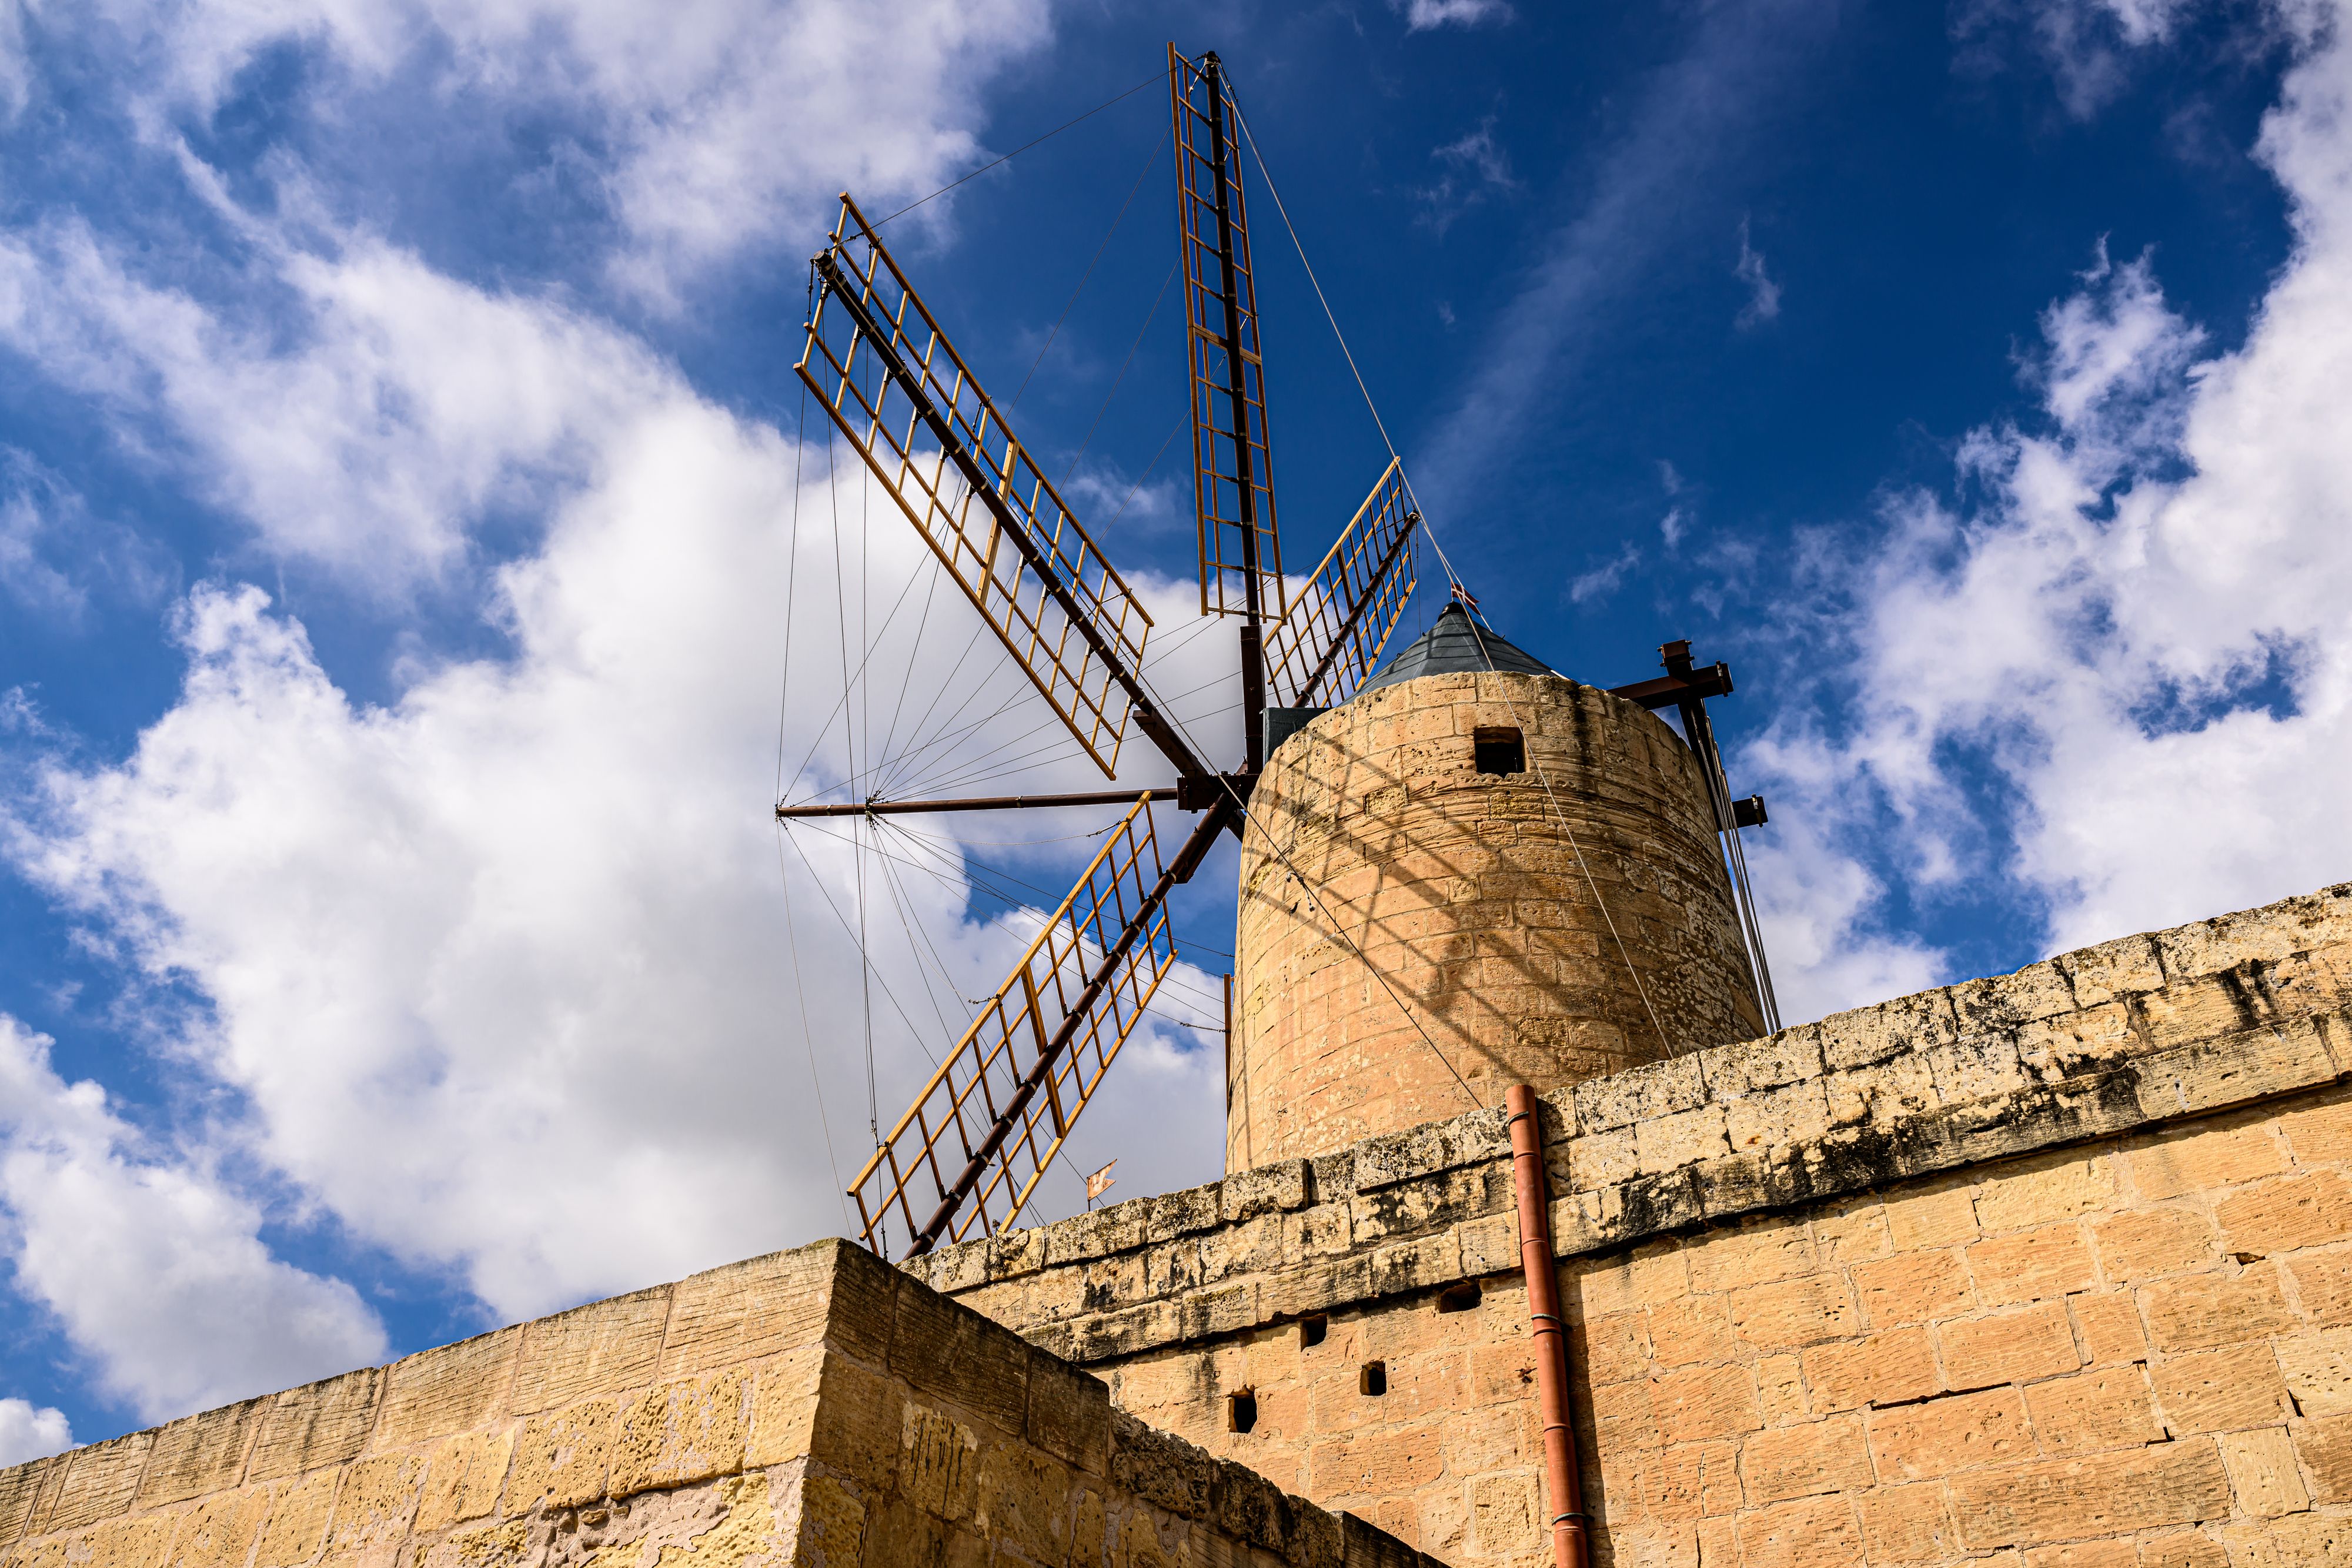 Looking up at antique Maltese windmill